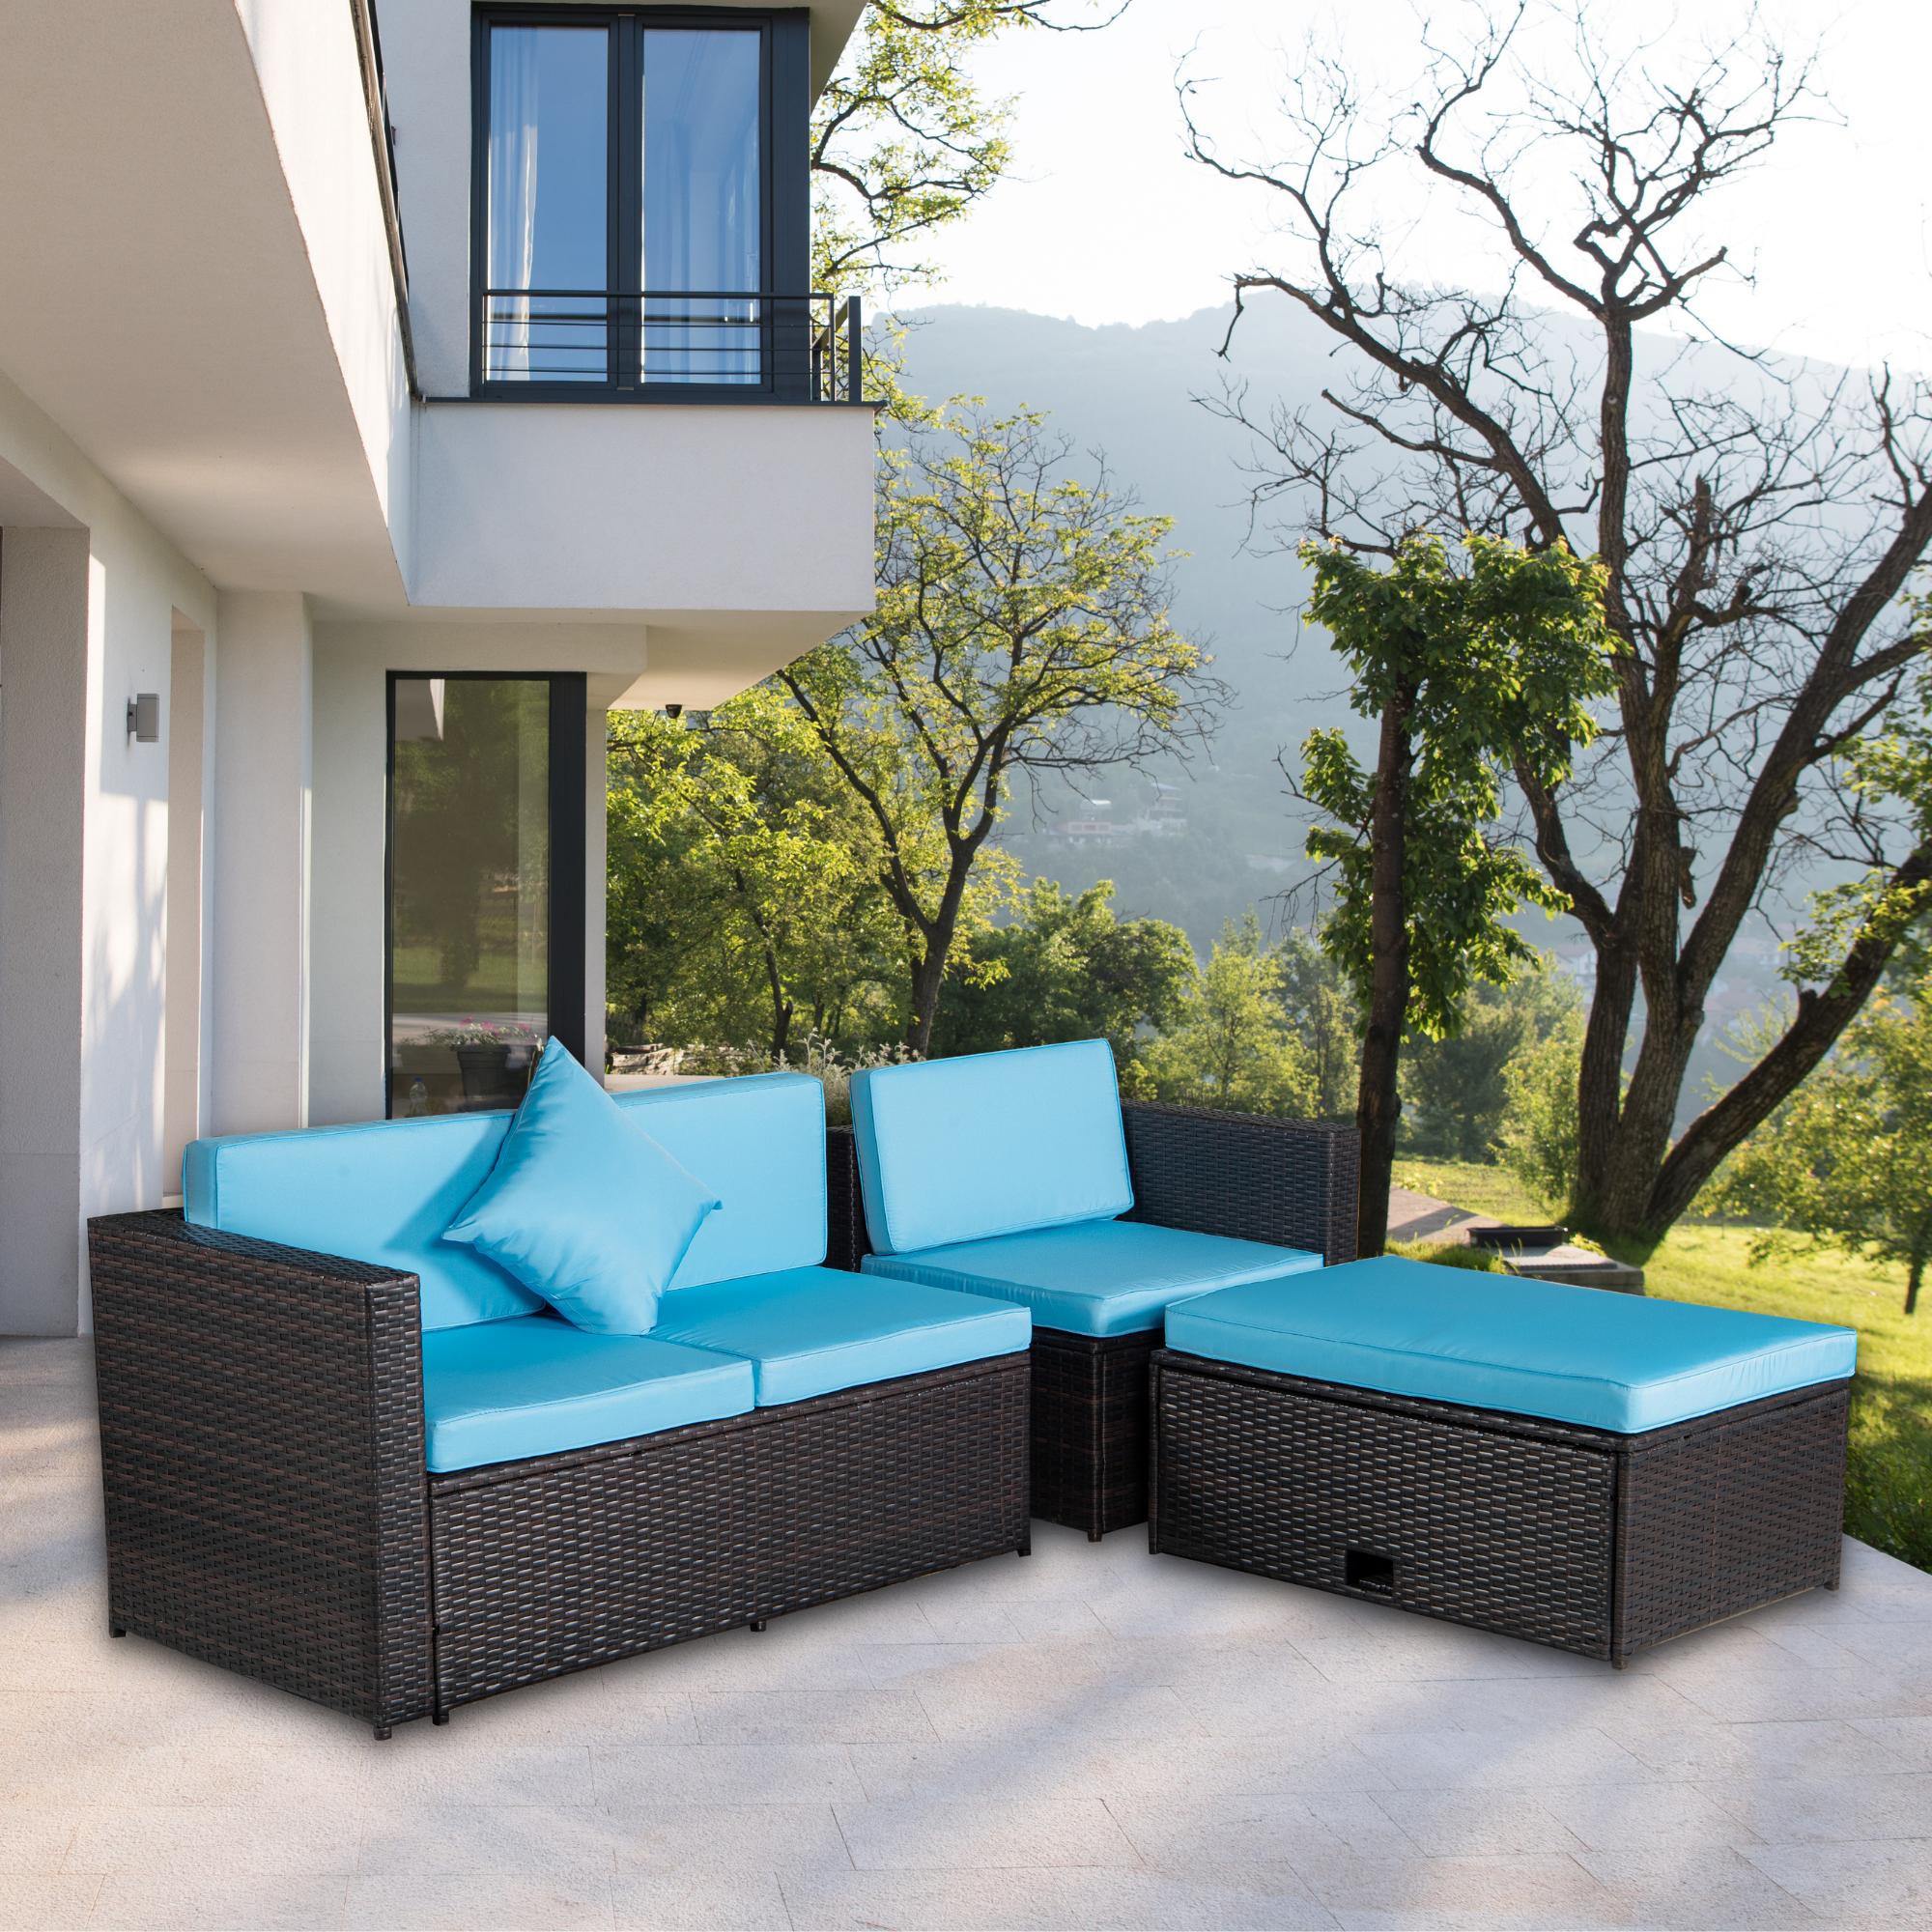 SEGMART Wicker Patio Furniture Sets, 2022 Newest 4-Piece Wicker Patio Conversation Furniture Set w/Seat Cushions & Tempered Glass Coffee, Conversation Sets for Porch Poolside Backyard Garden, S8183 - image 2 of 10